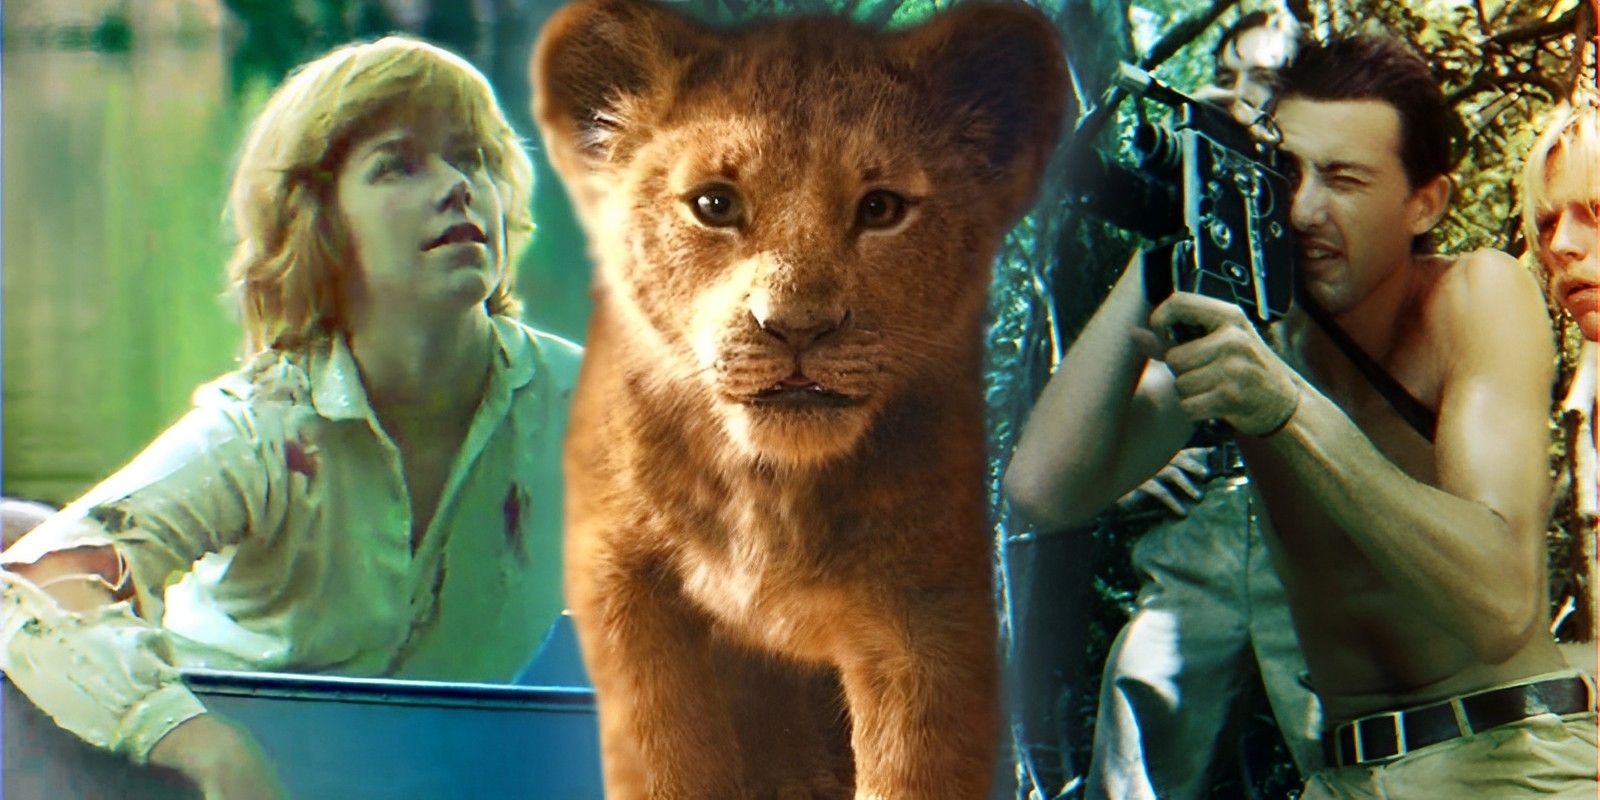 Friday the 13th’s Alice in boat and scene from Cannibal Holocaust with CGI Simba from The Lion King.